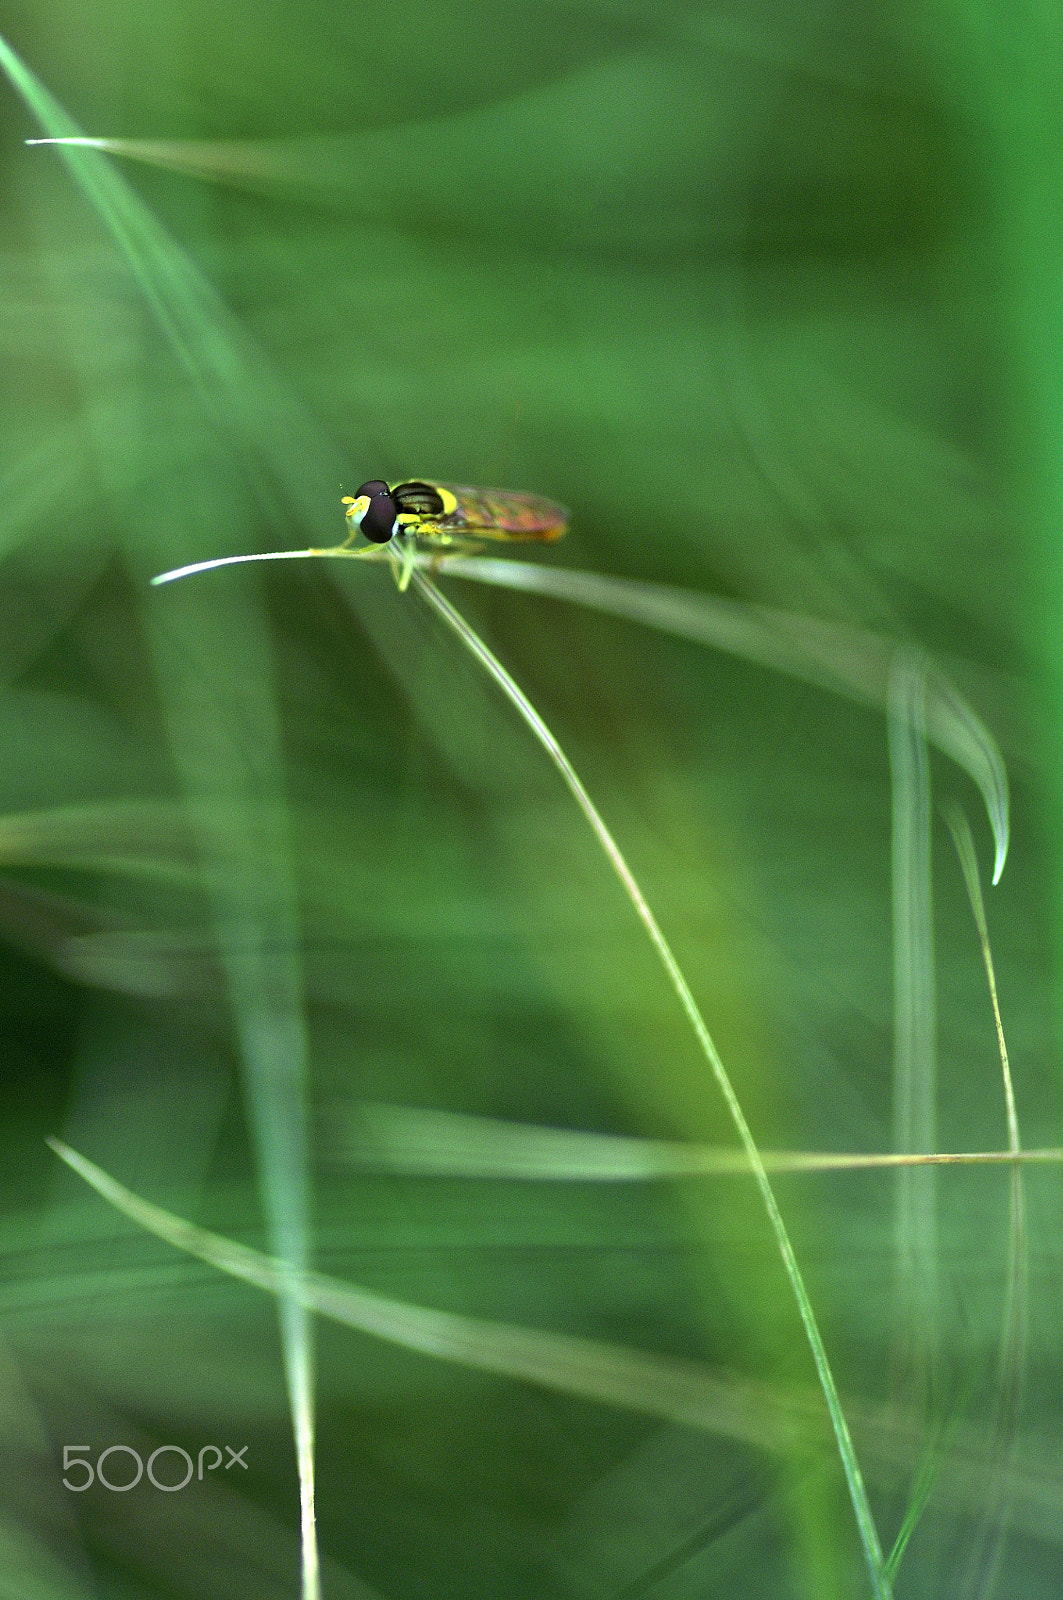 Nikon D90 sample photo. The bee on the grass to rest photography